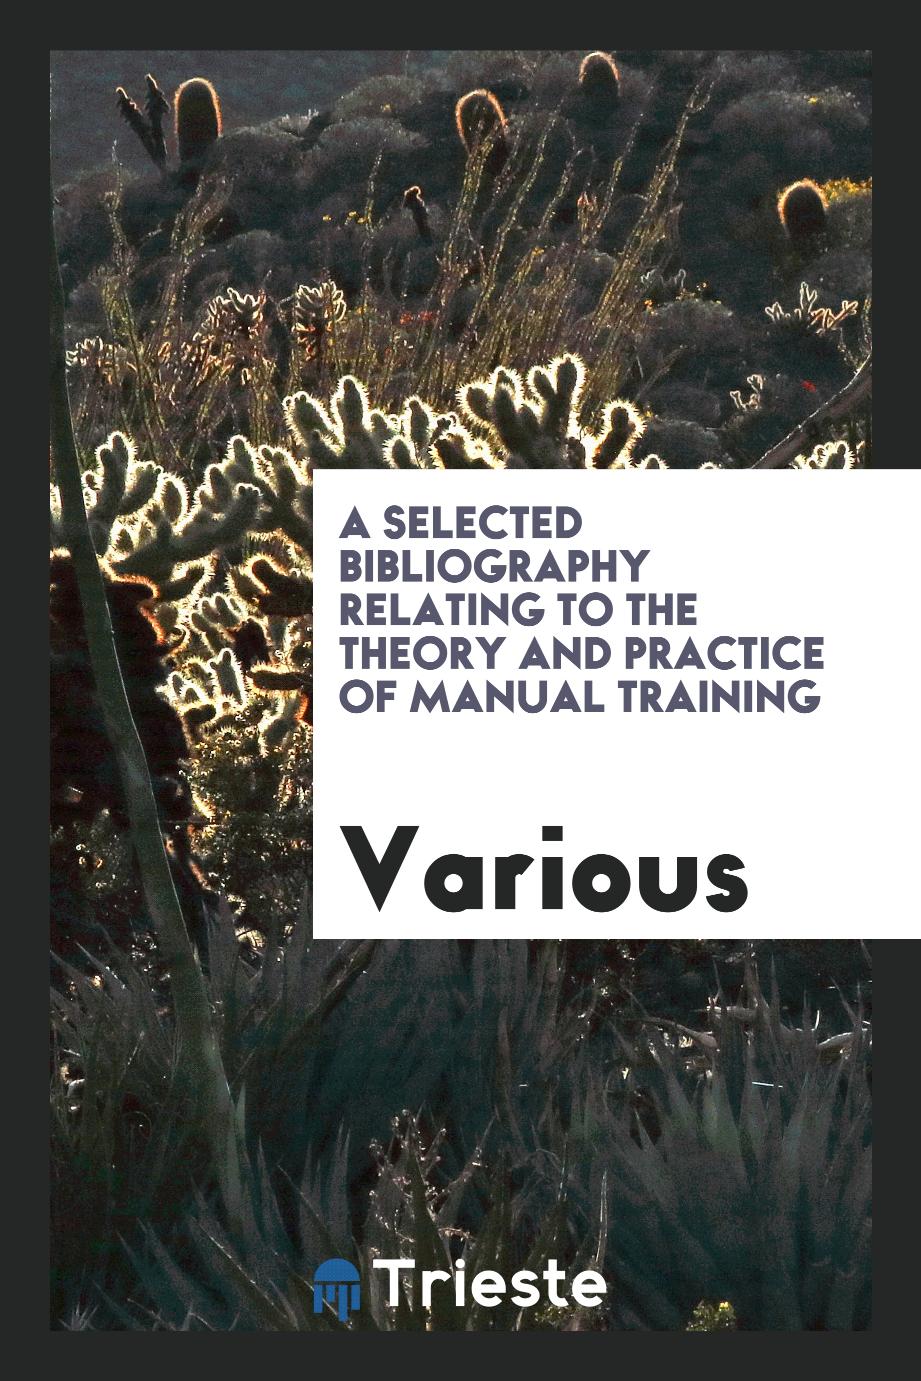 A Selected Bibliography Relating to the Theory and Practice of Manual Training